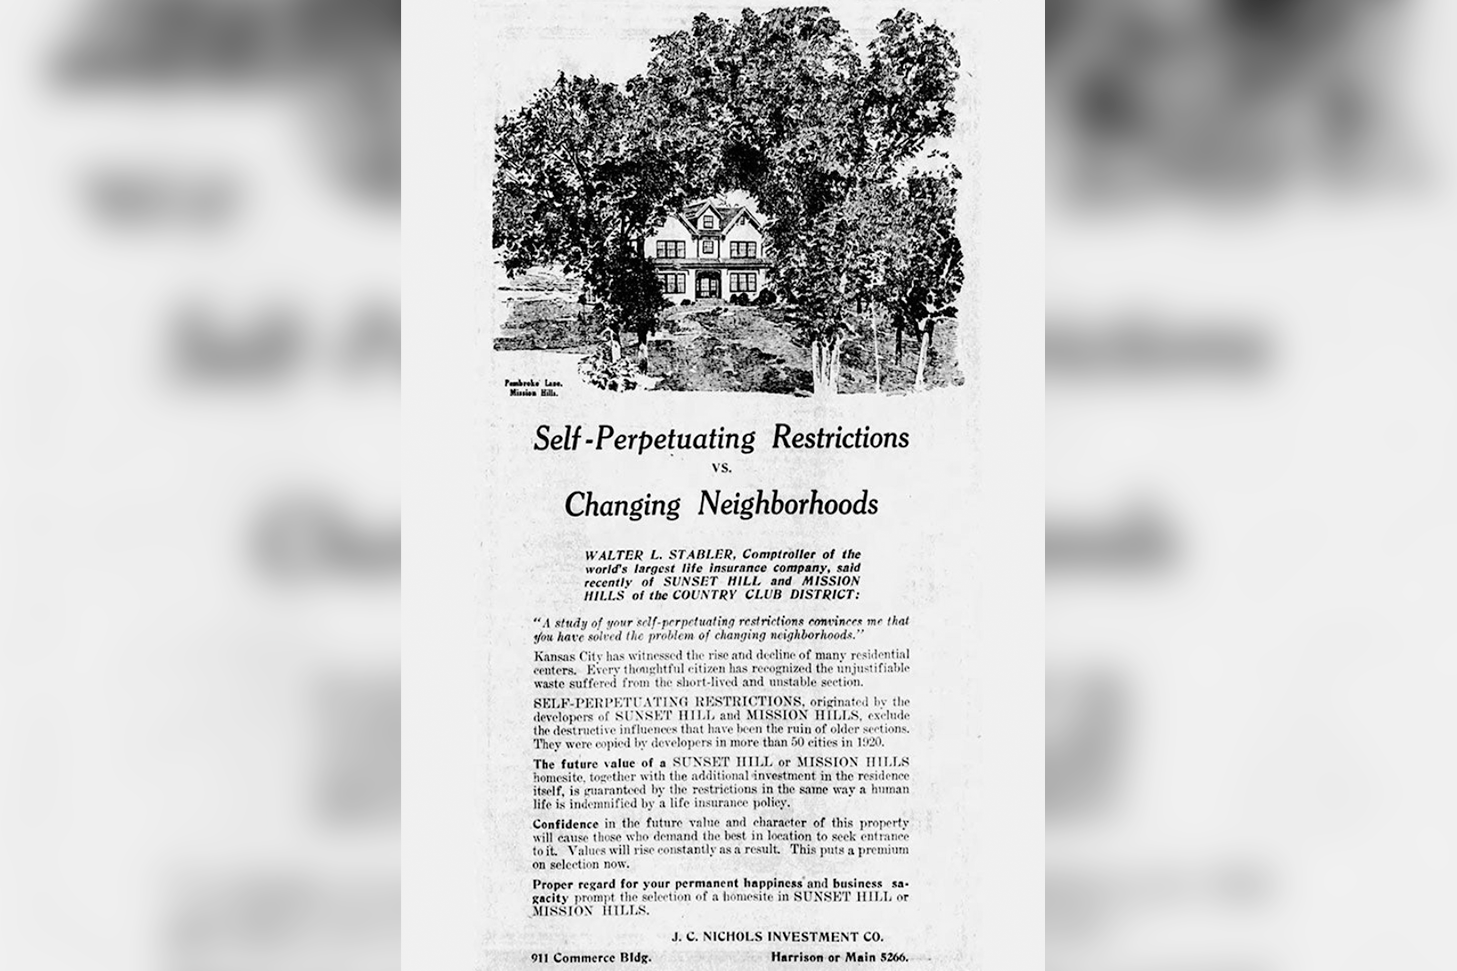 An old-timey newspaper ad for a J.C. Nichols–designed neighborhood, with a sketch of a two-story house under large trees, titled "Self-Perpetuating Restrictions vs. Changing Neighborhoods."